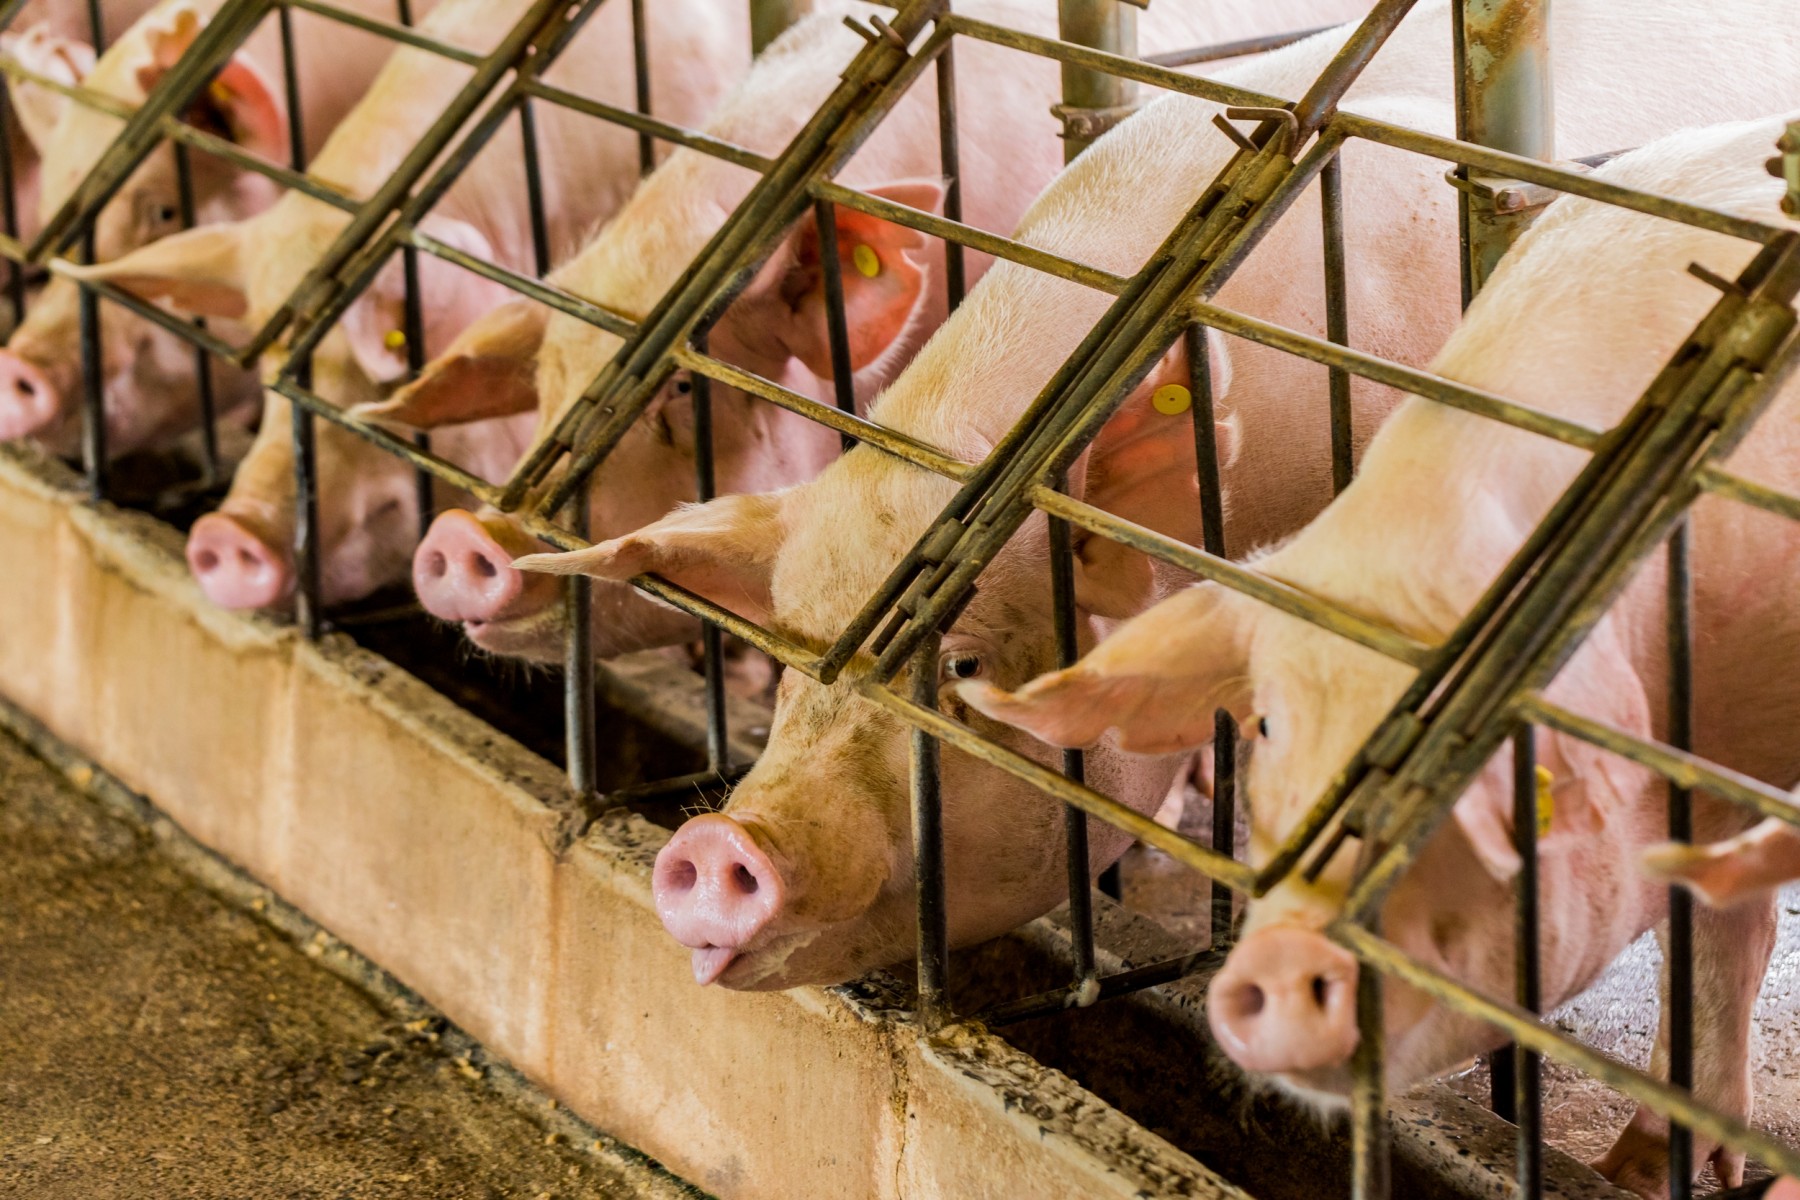 Pigs in a row of cages - World Animal Protection - Animals in farming